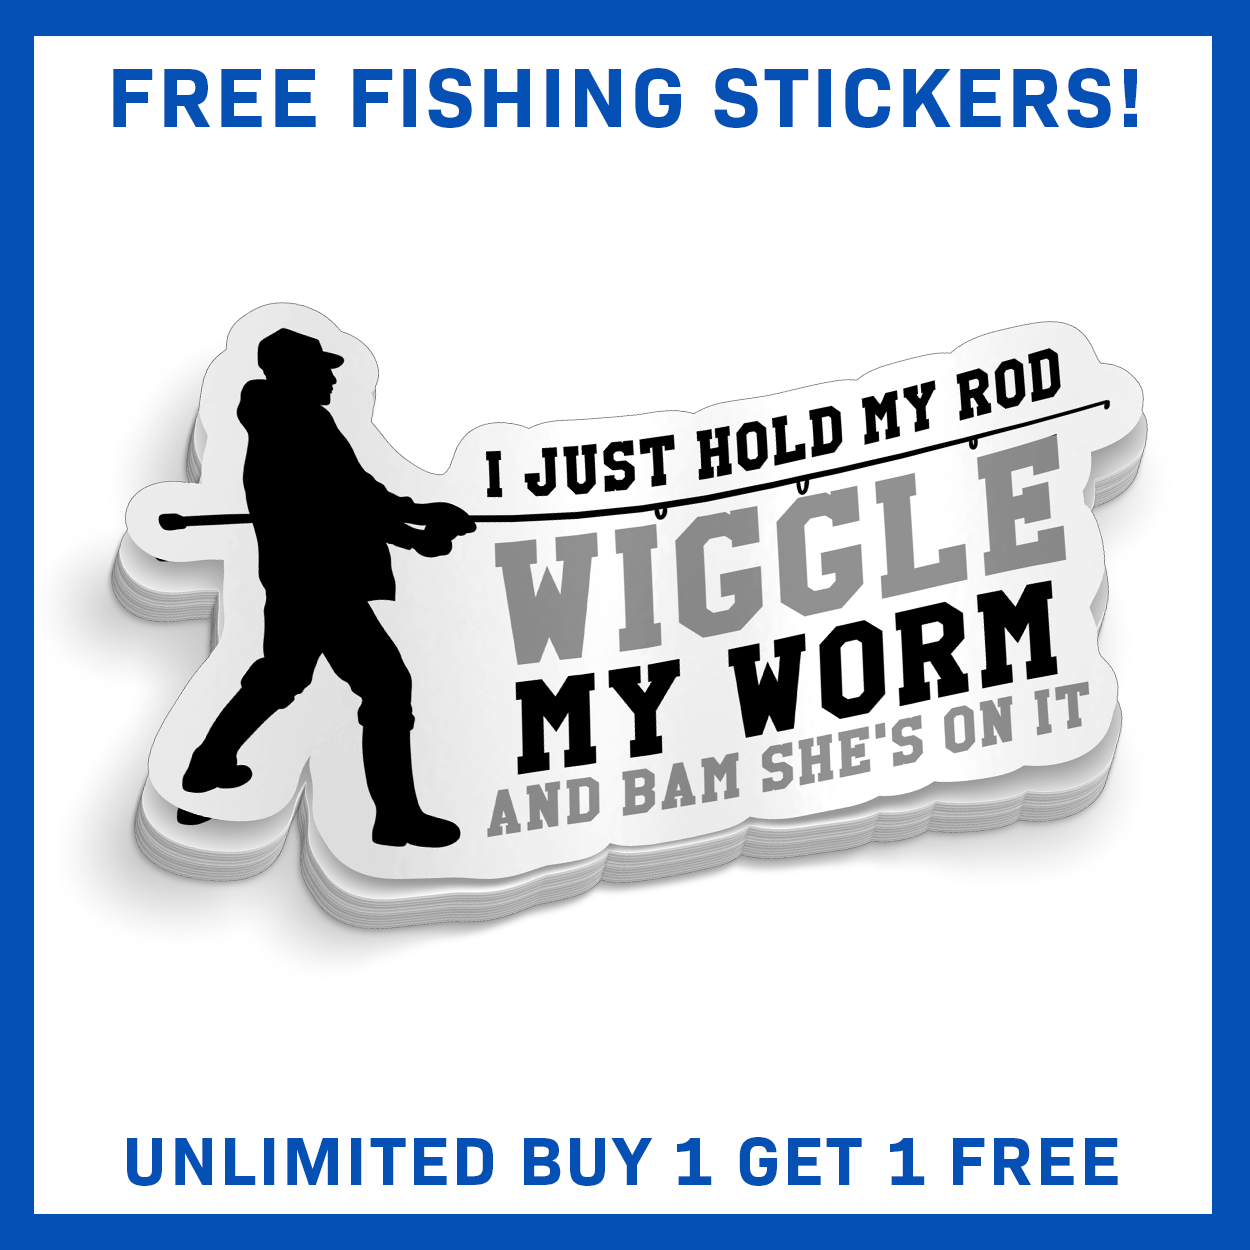 I Just Hold My Rod, Wiggle My Worm - Funny Fishing Sticker